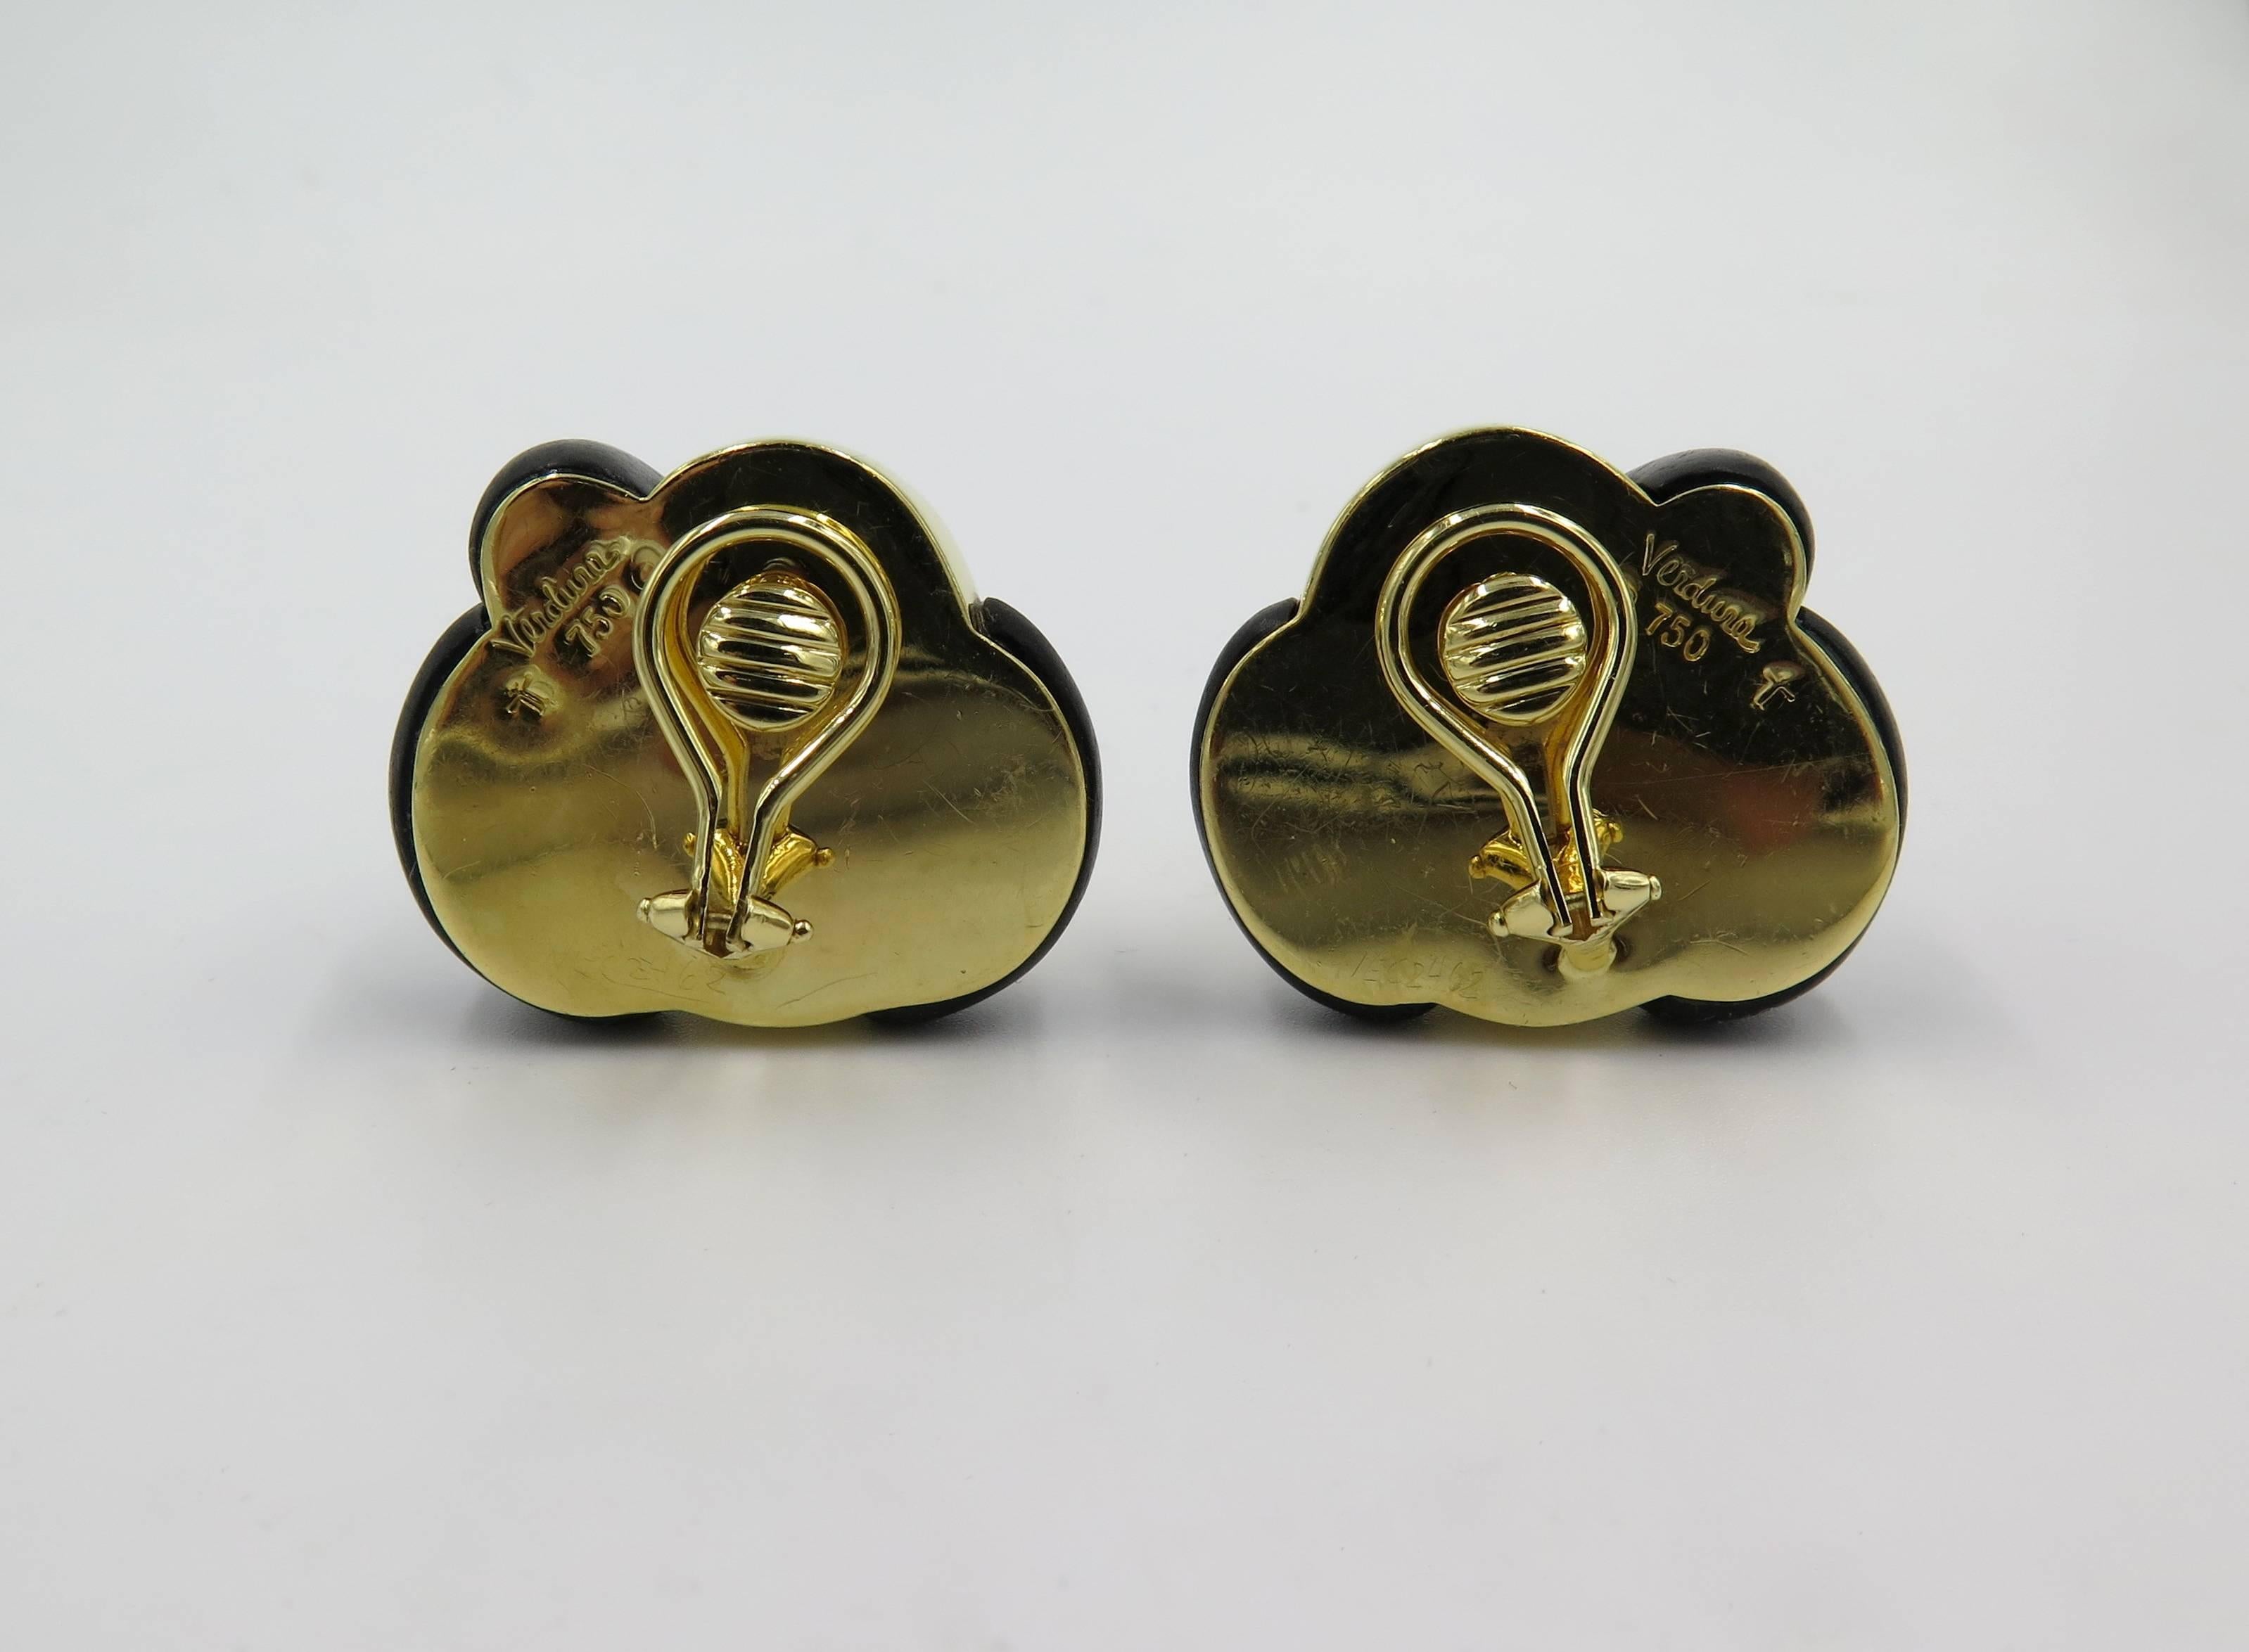 A pair of 18 karat yellow gold and wood earrings. Verdura. Designed as dark wood and polished gold knots. Length is approximately 1 inch. Gross weight is approximately 34.7 grams. 